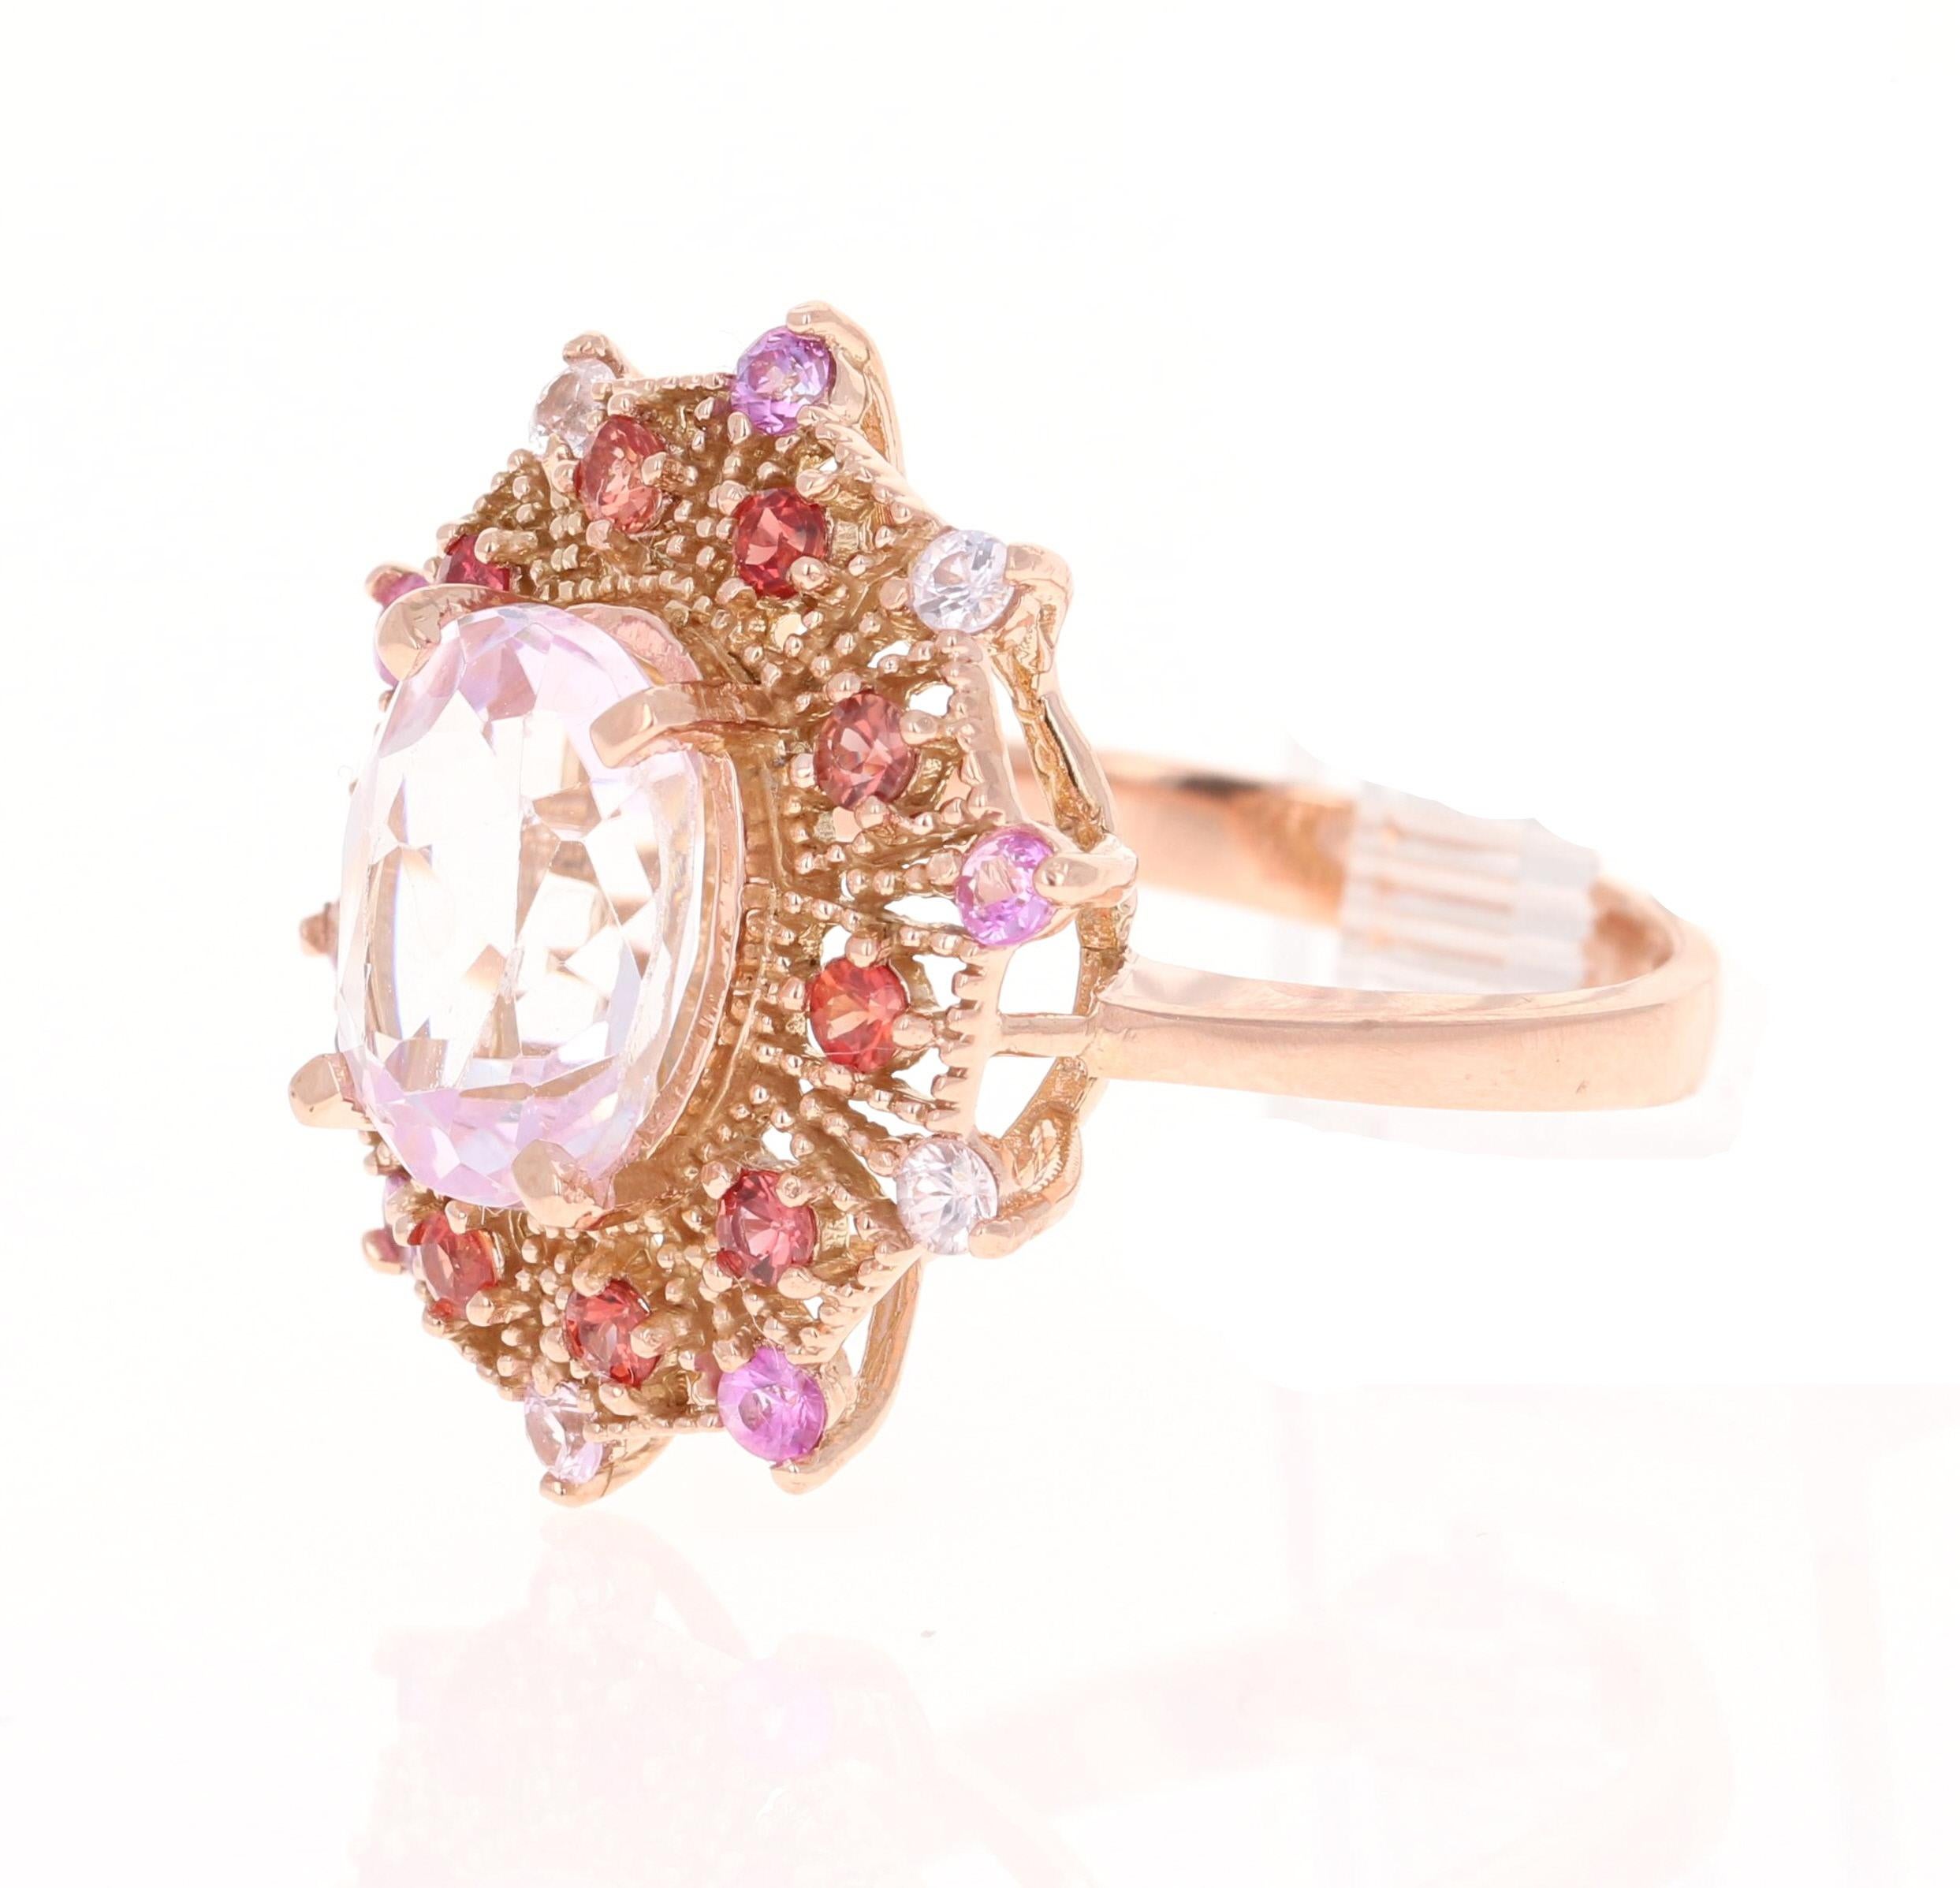 Contemporary 5.05 Carat Oval Cut Kunzite Multi-Sapphire Rose Gold Cocktail Ring